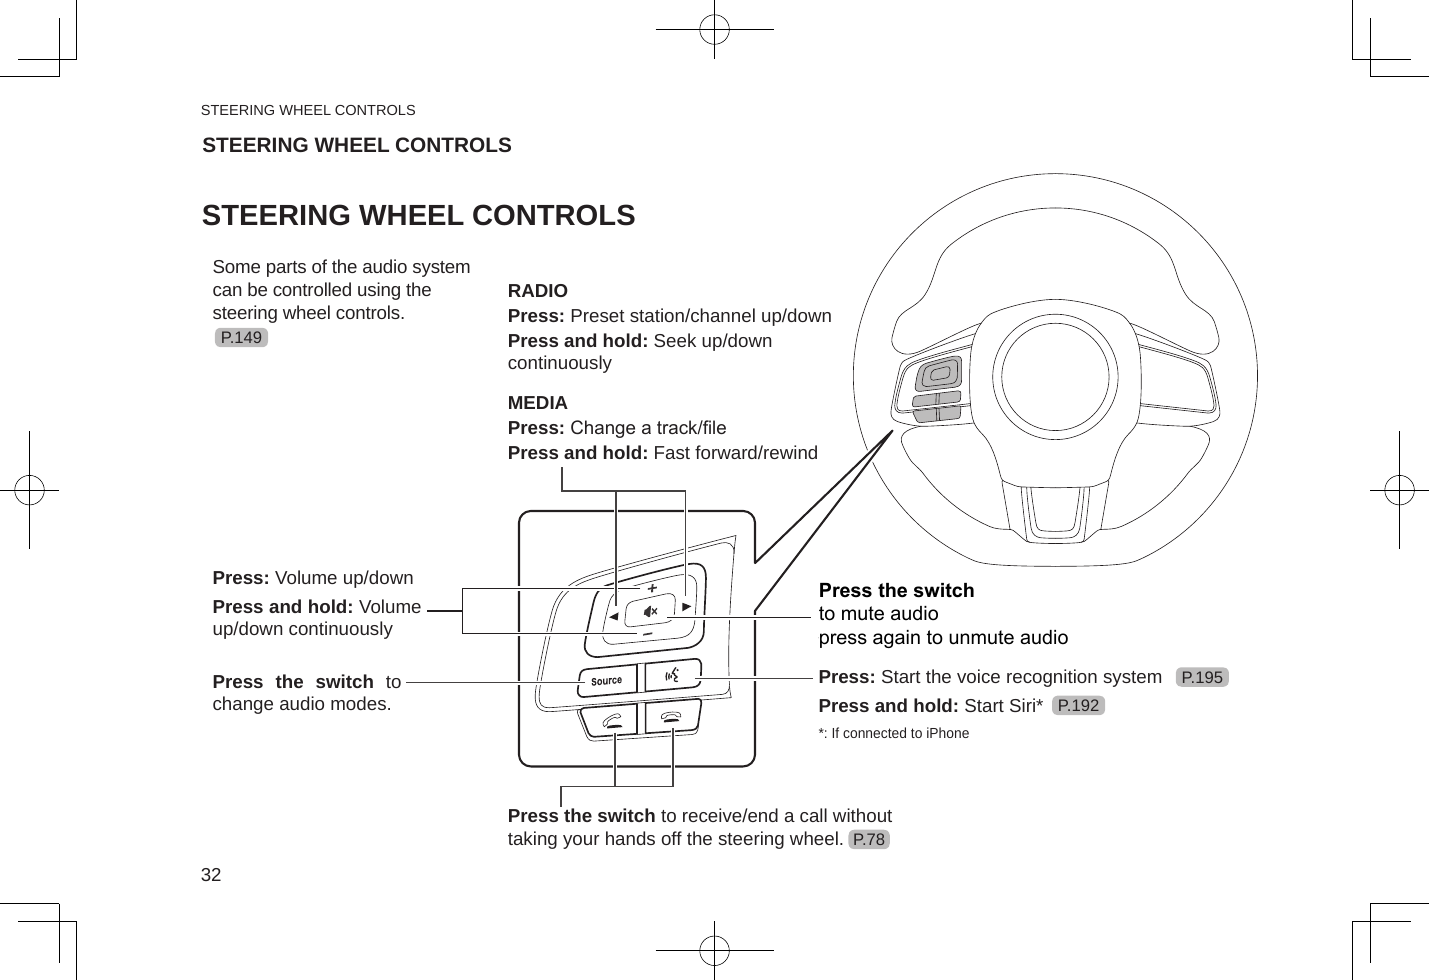 STEERING WHEEL CONTROLS32STEERING WHEEL CONTROLSSTEERING WHEEL CONTROLSSome parts of the audio system can be controlled using the steering wheel controls. RADIOPress: Preset station/channel up/downPress and hold: Seek up/down continuouslyMEDIAPress: Change a track/lePress and hold: Fast forward/rewindPress: Volume up/downPress and hold: Volume up/down continuouslyPress the switch to change audio modes.Press the switch to receive/end a call without taking your hands off the steering wheel.P.149P.195P.192P.78Press: Start the voice recognition systemPress and hold: Start Siri**: If connected to iPhonePress the switch to mute the audio volume on/off.Press the switchto mute audiopress again to unmute audio